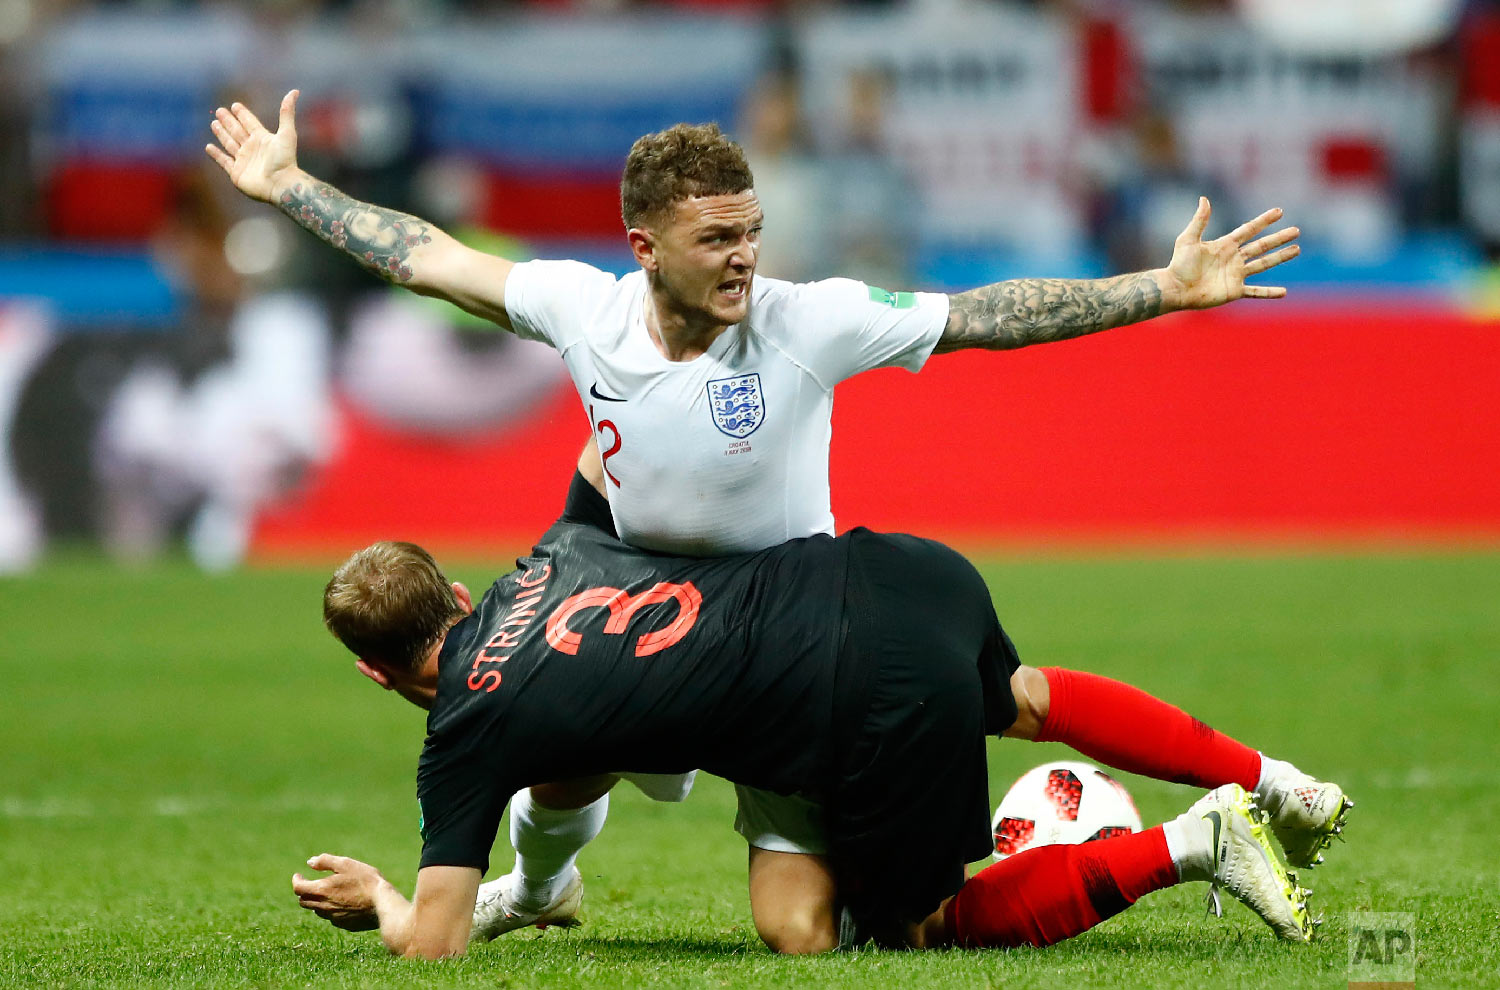  England's Kieran Trippier, up, and Croatia's Ivan Strinic challenge for the ball during the semifinal match between Croatia and England at the 2018 soccer World Cup in the Luzhniki Stadium in Moscow, Russia, Wednesday, July 11, 2018. (AP Photo/Matth